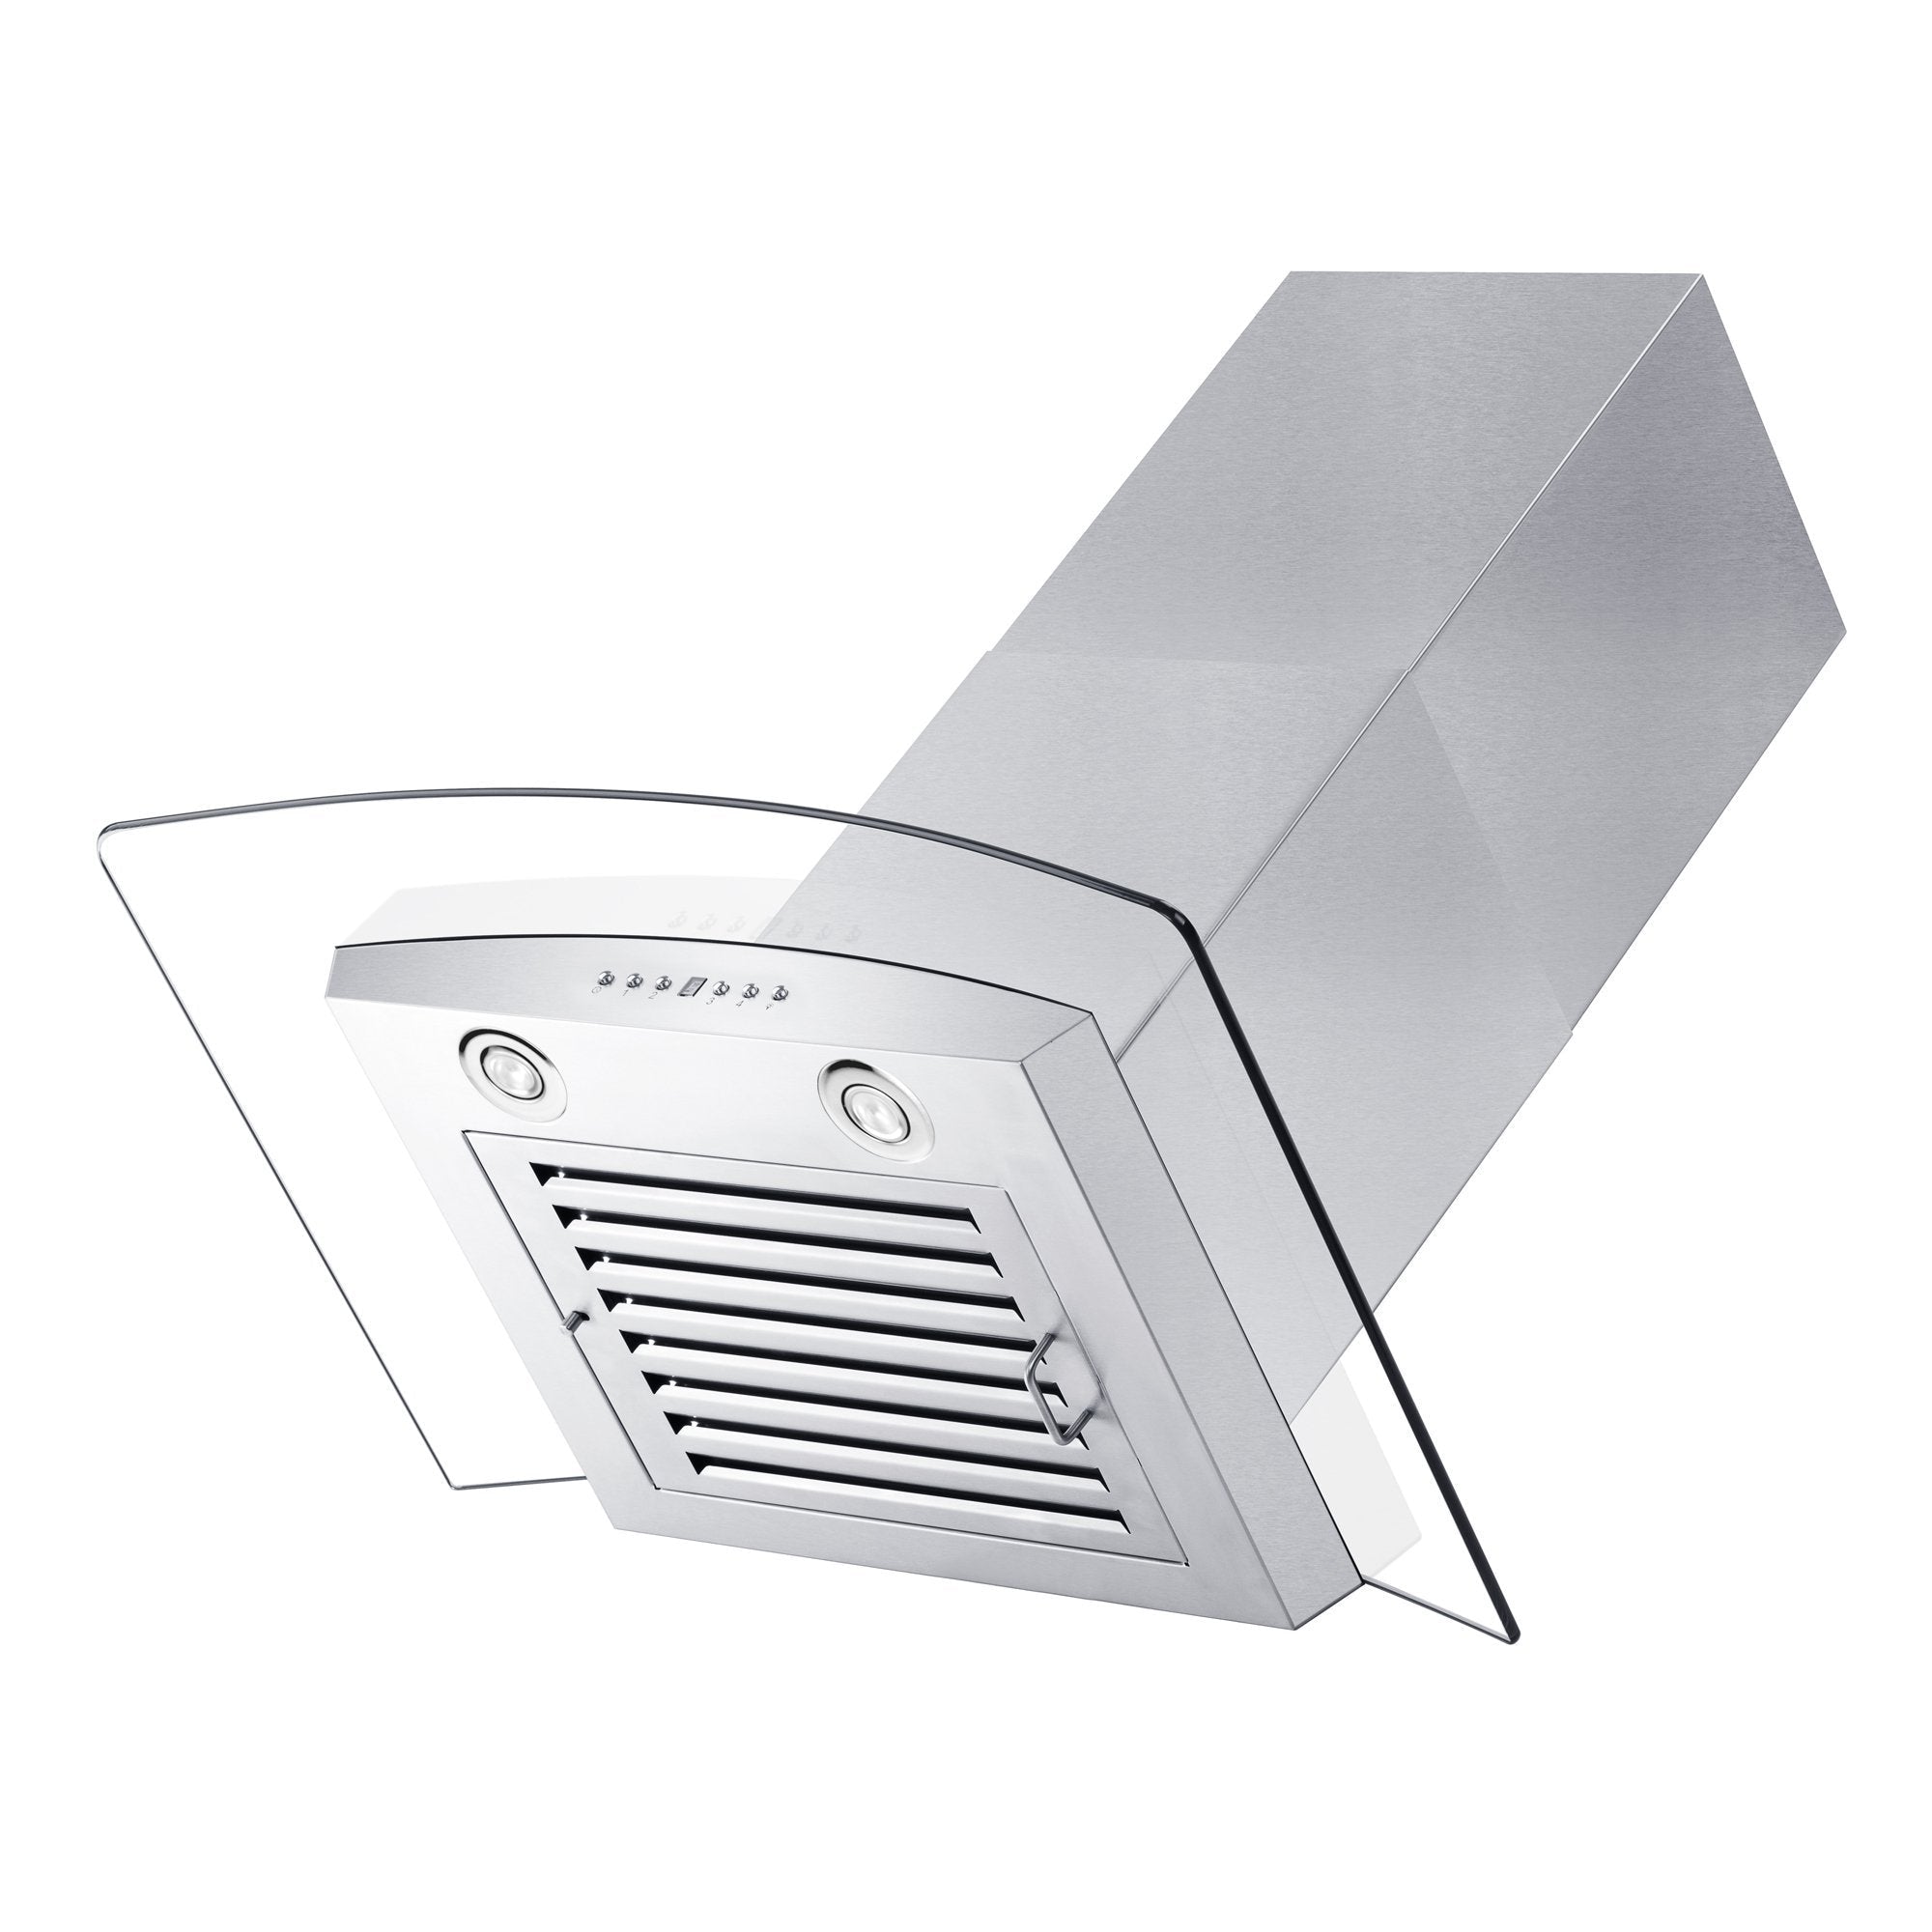 ZLINE Convertible Vent Wall Mount Range Hood in Stainless Steel & Glass with Crown Molding (KZCRN) angled under showing LED lighting and baffle filter.